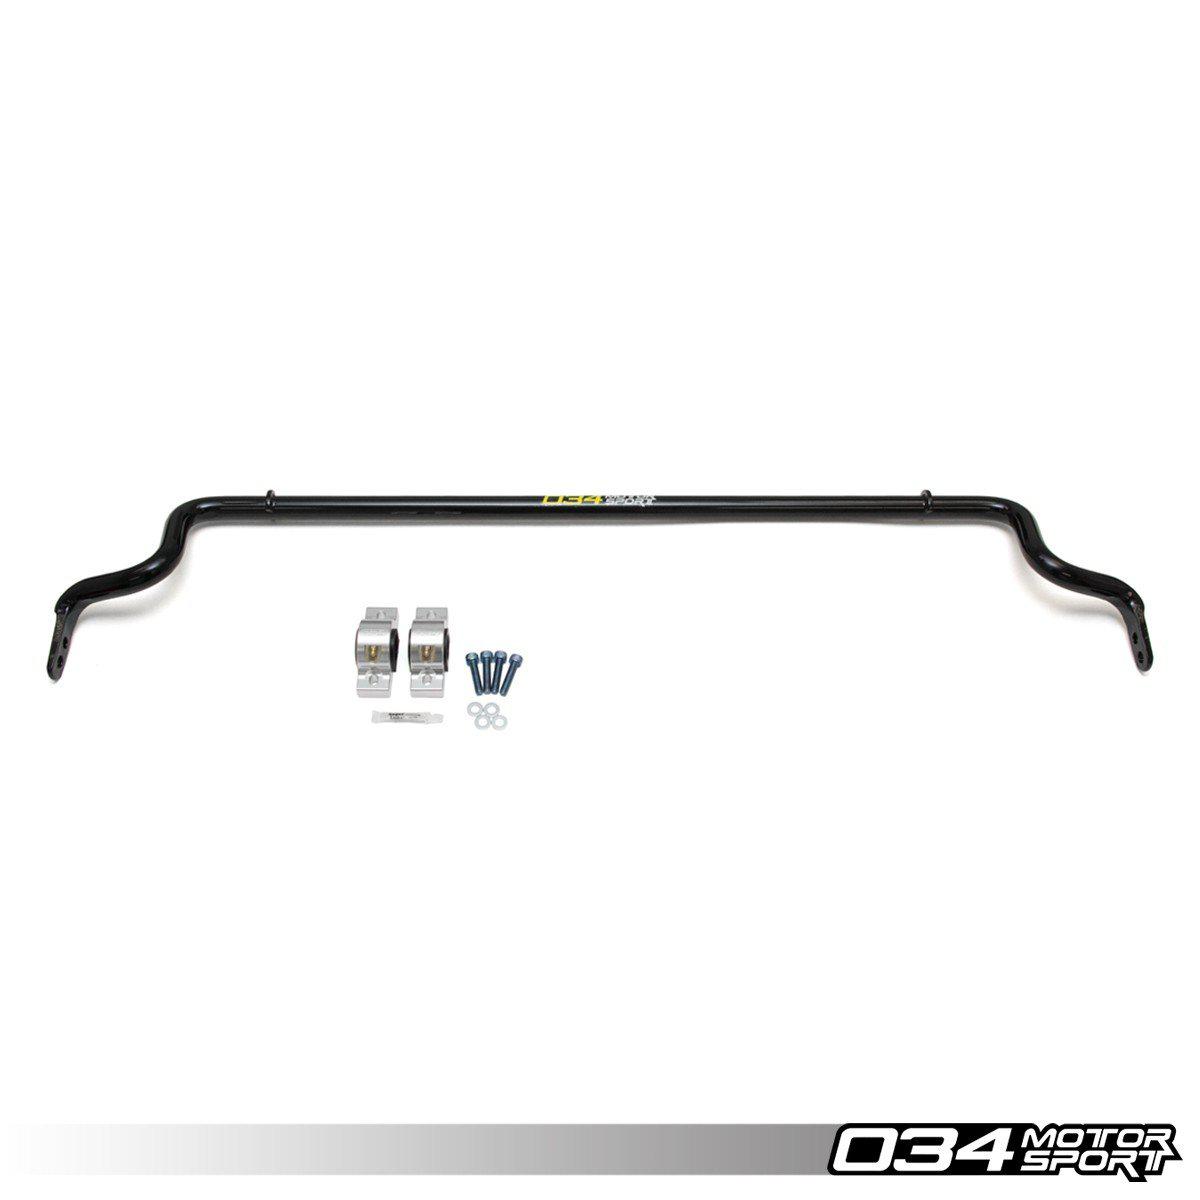 Adjustable Solid Rear Sway Bar, B8/B8.5 Audi Q5/SQ5 &amp; C7/C7.5 A6/S6/RS6/A7/S7/Rs7-A Little Tuning Co